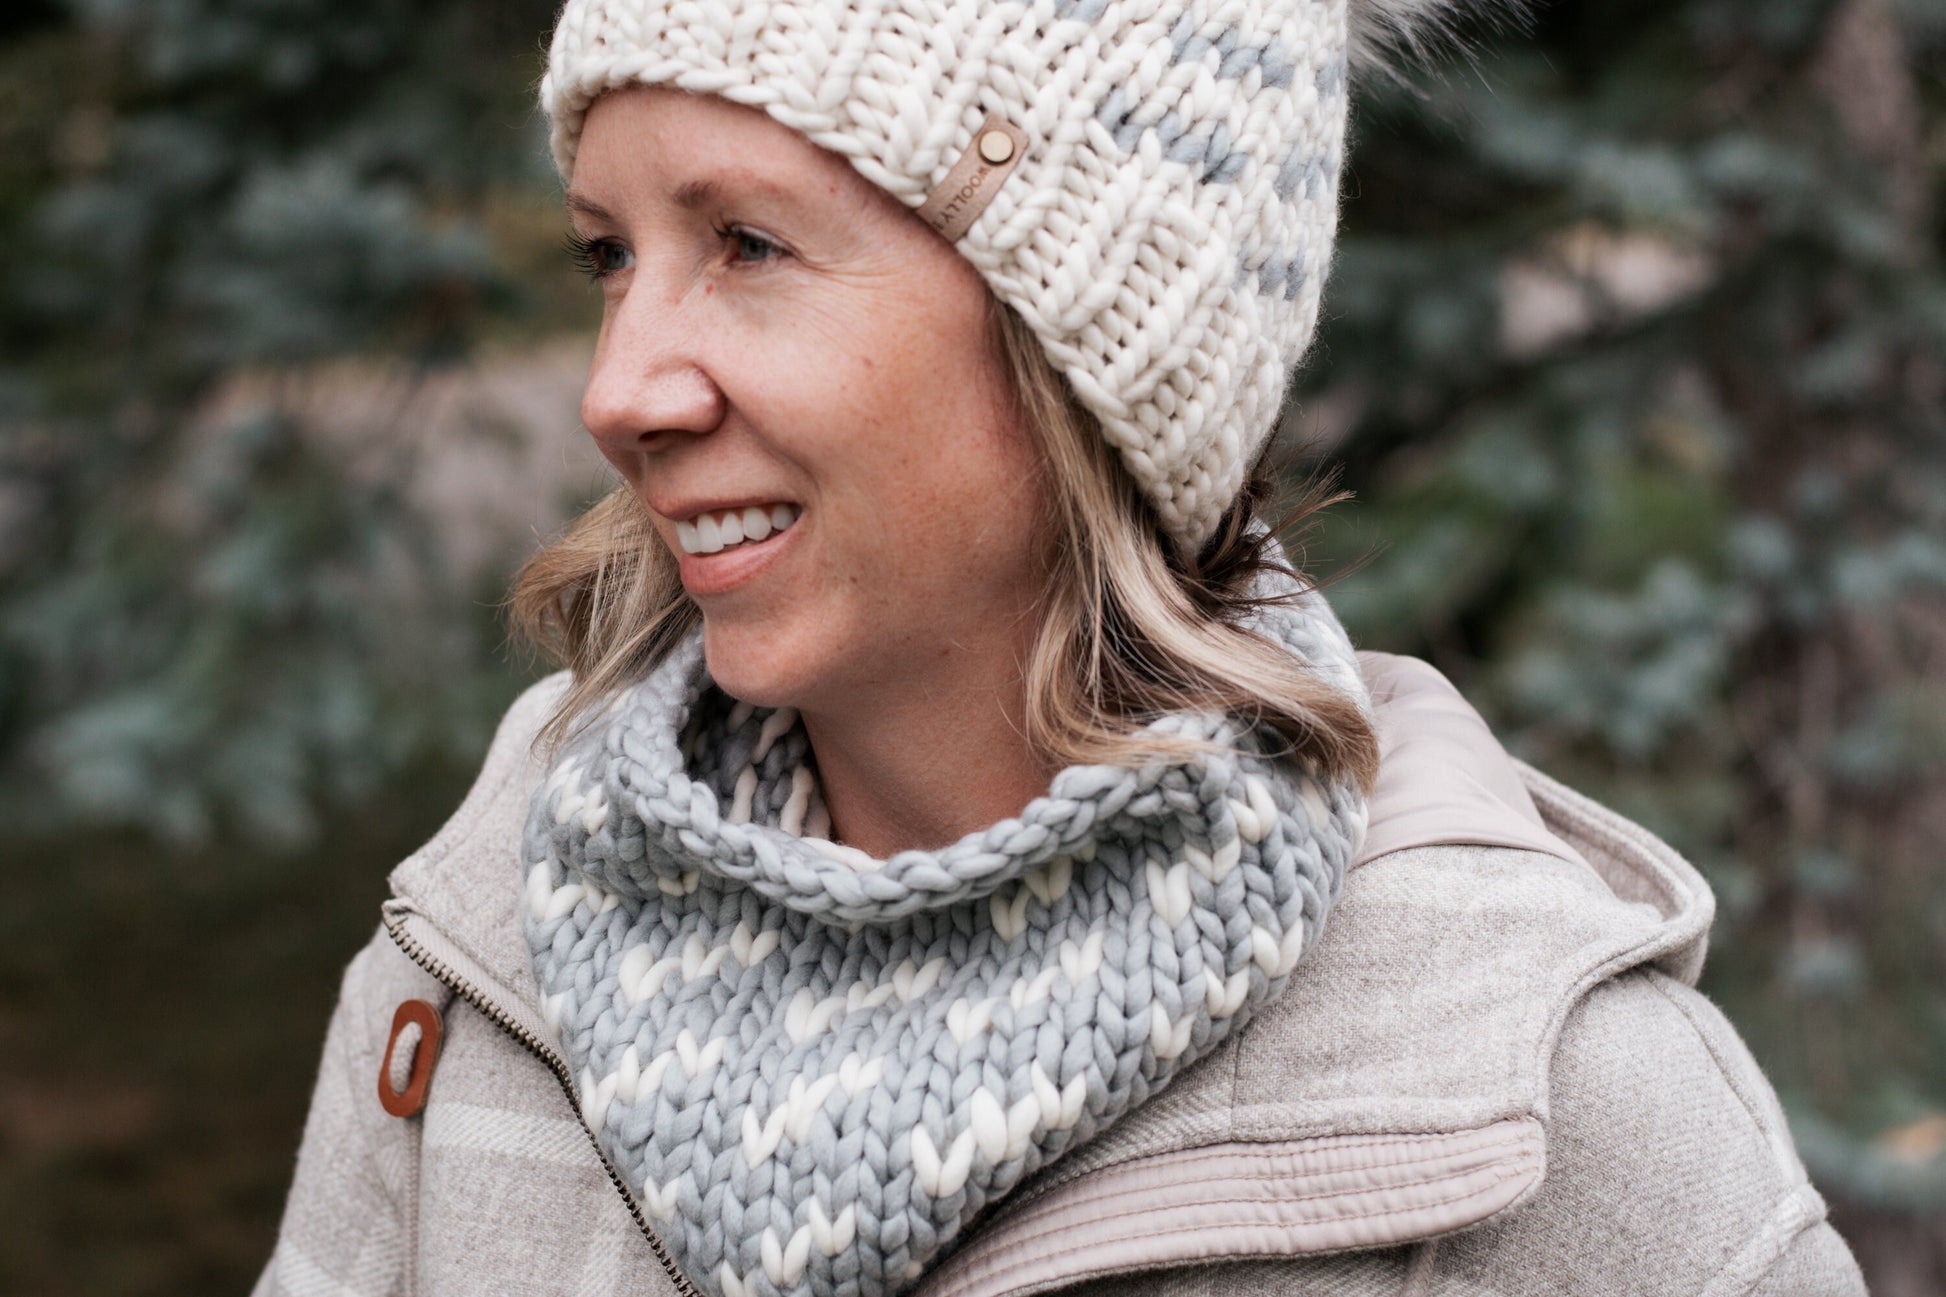 KNITTING PATTERN: Migrations Cowl